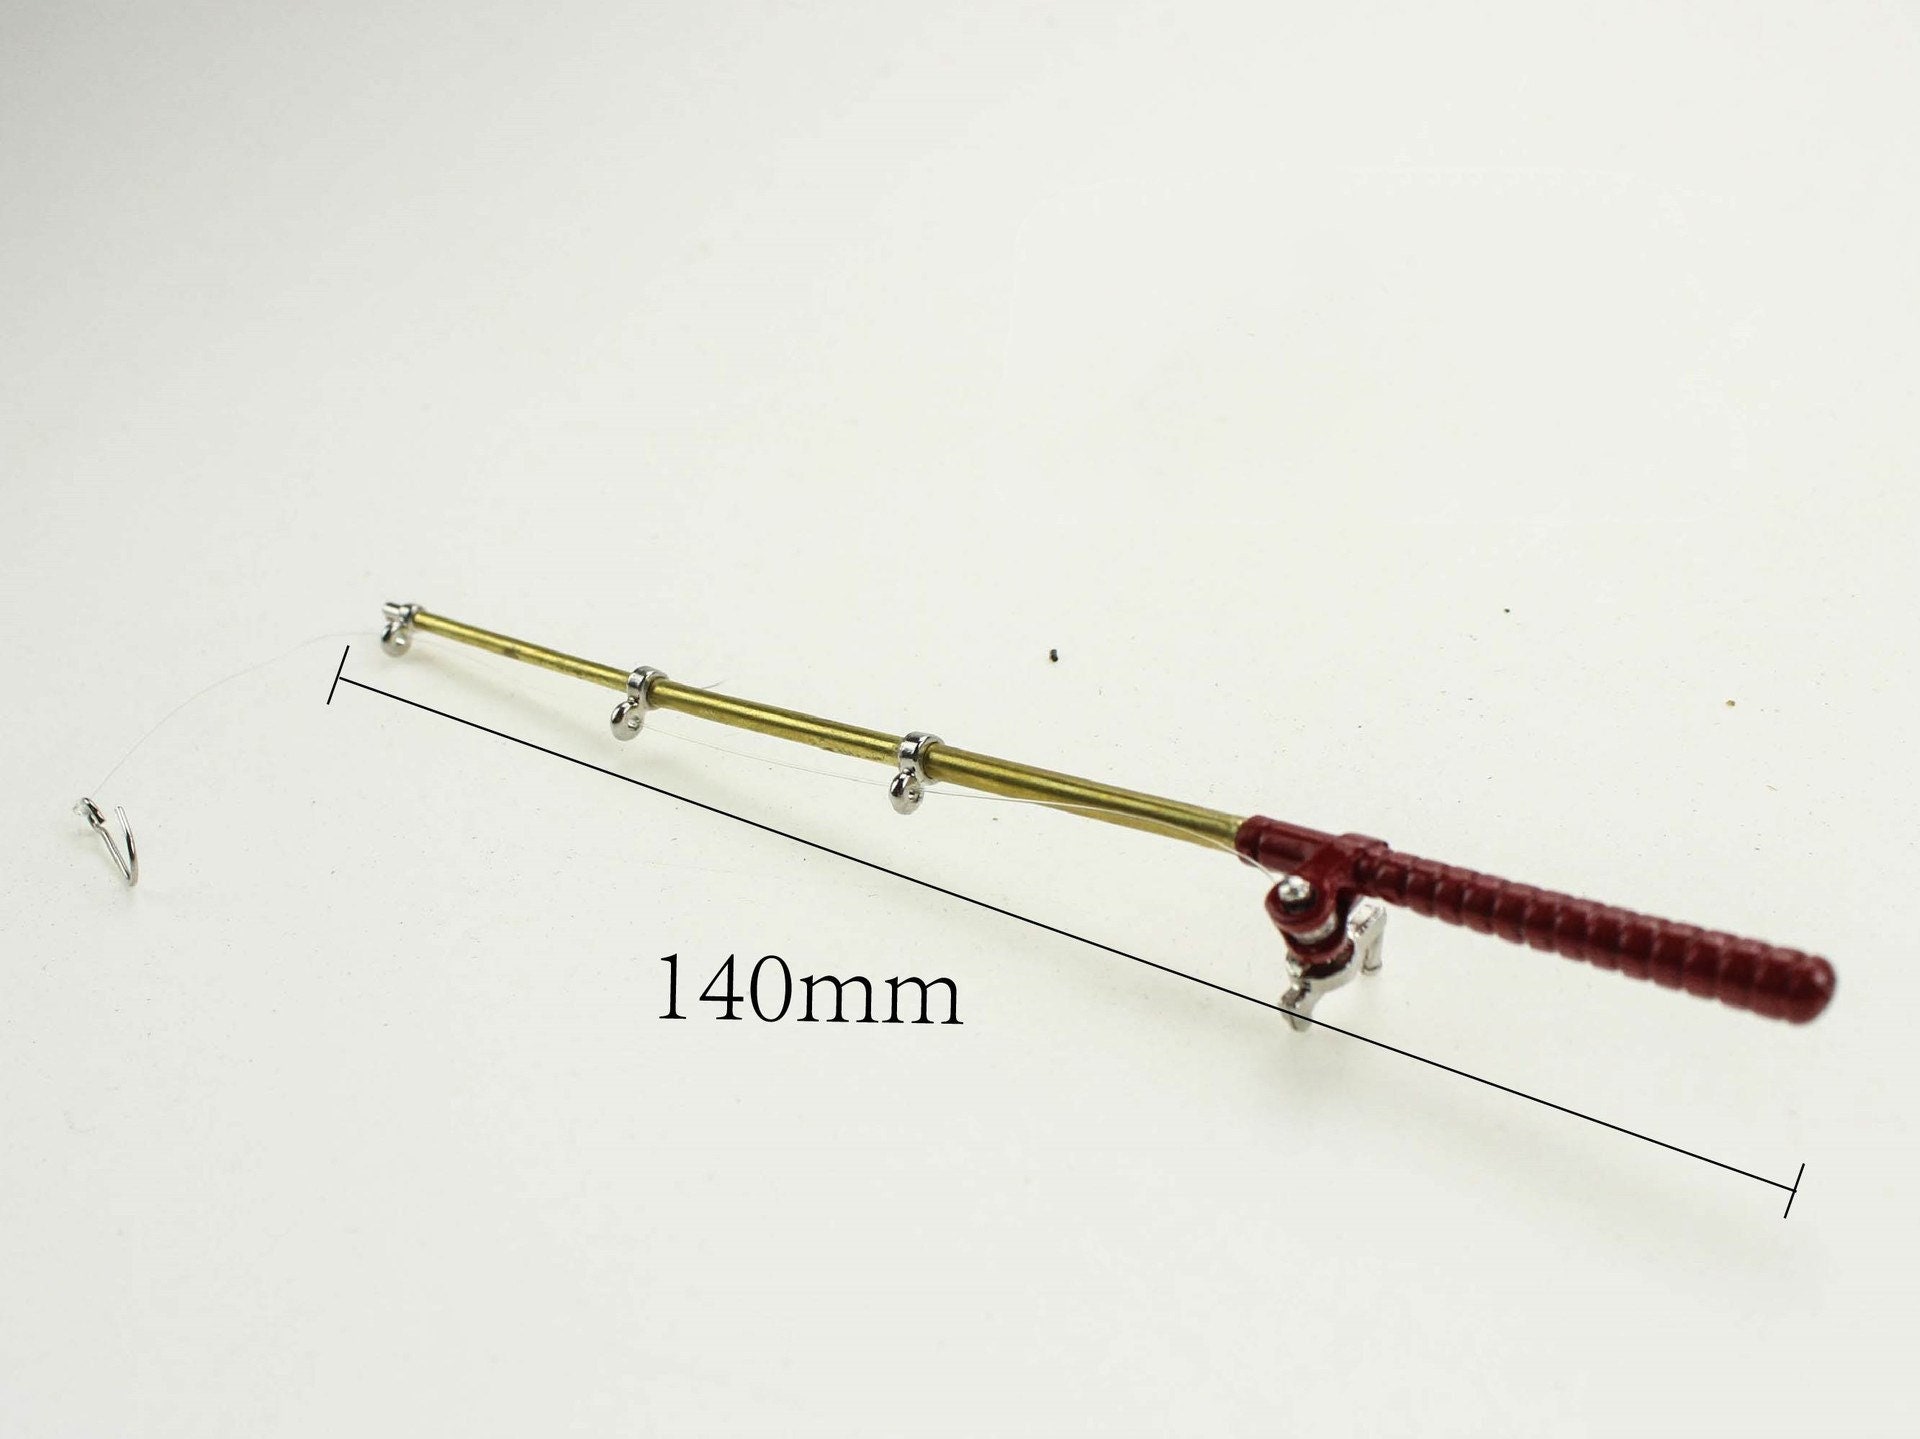 Miniature Fishing Pole, Minidollhouse Fishing Gear, Mini Fish Rod,  Dollhouse Miniature, Mini Outdoor Activities Accessory Toy, 1:12 Scale -   Canada